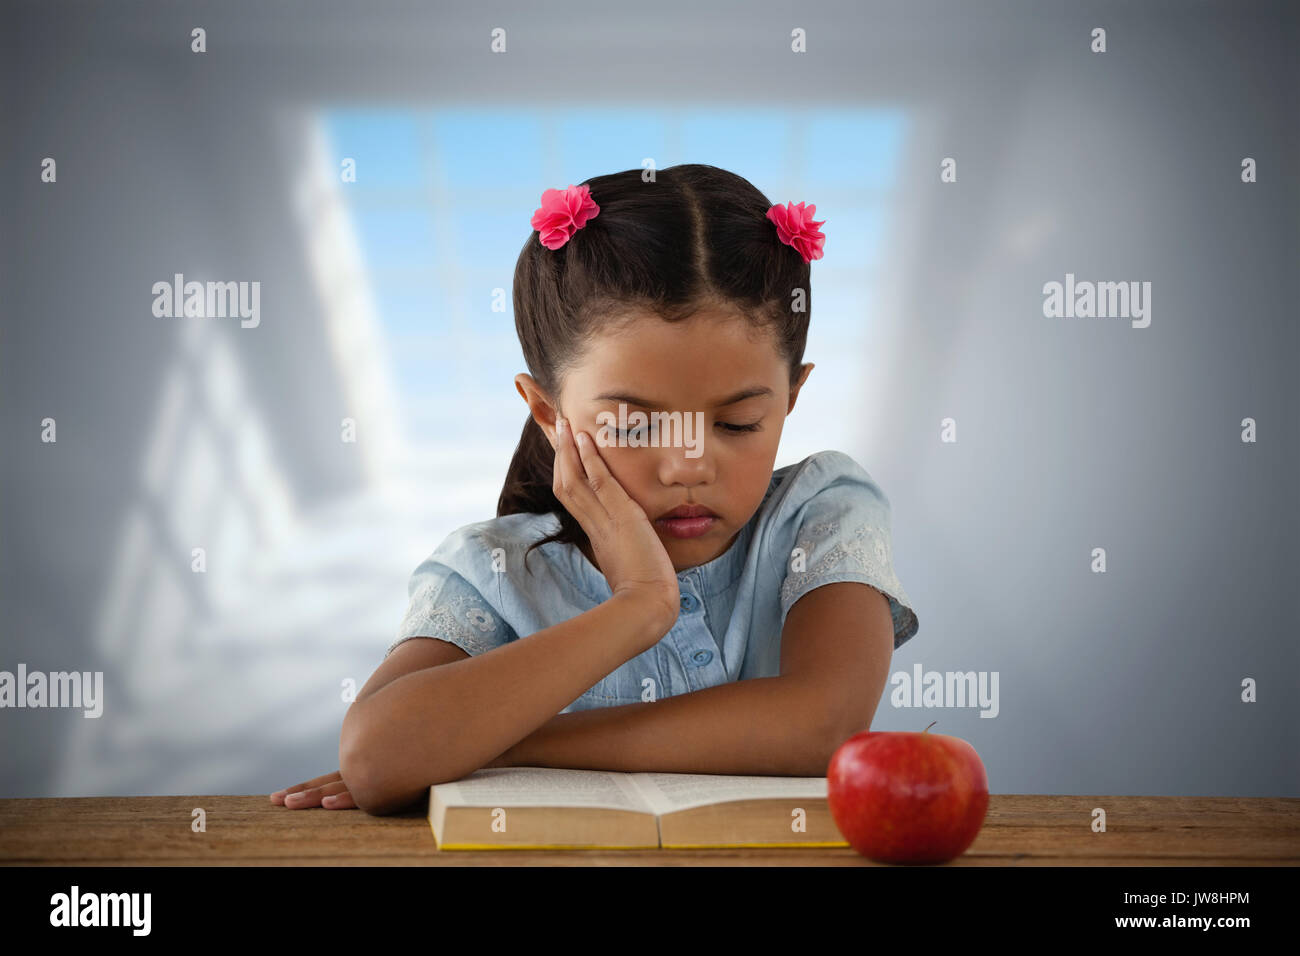 Concentrated girl reading book at desk against room with large windows Stock Photo